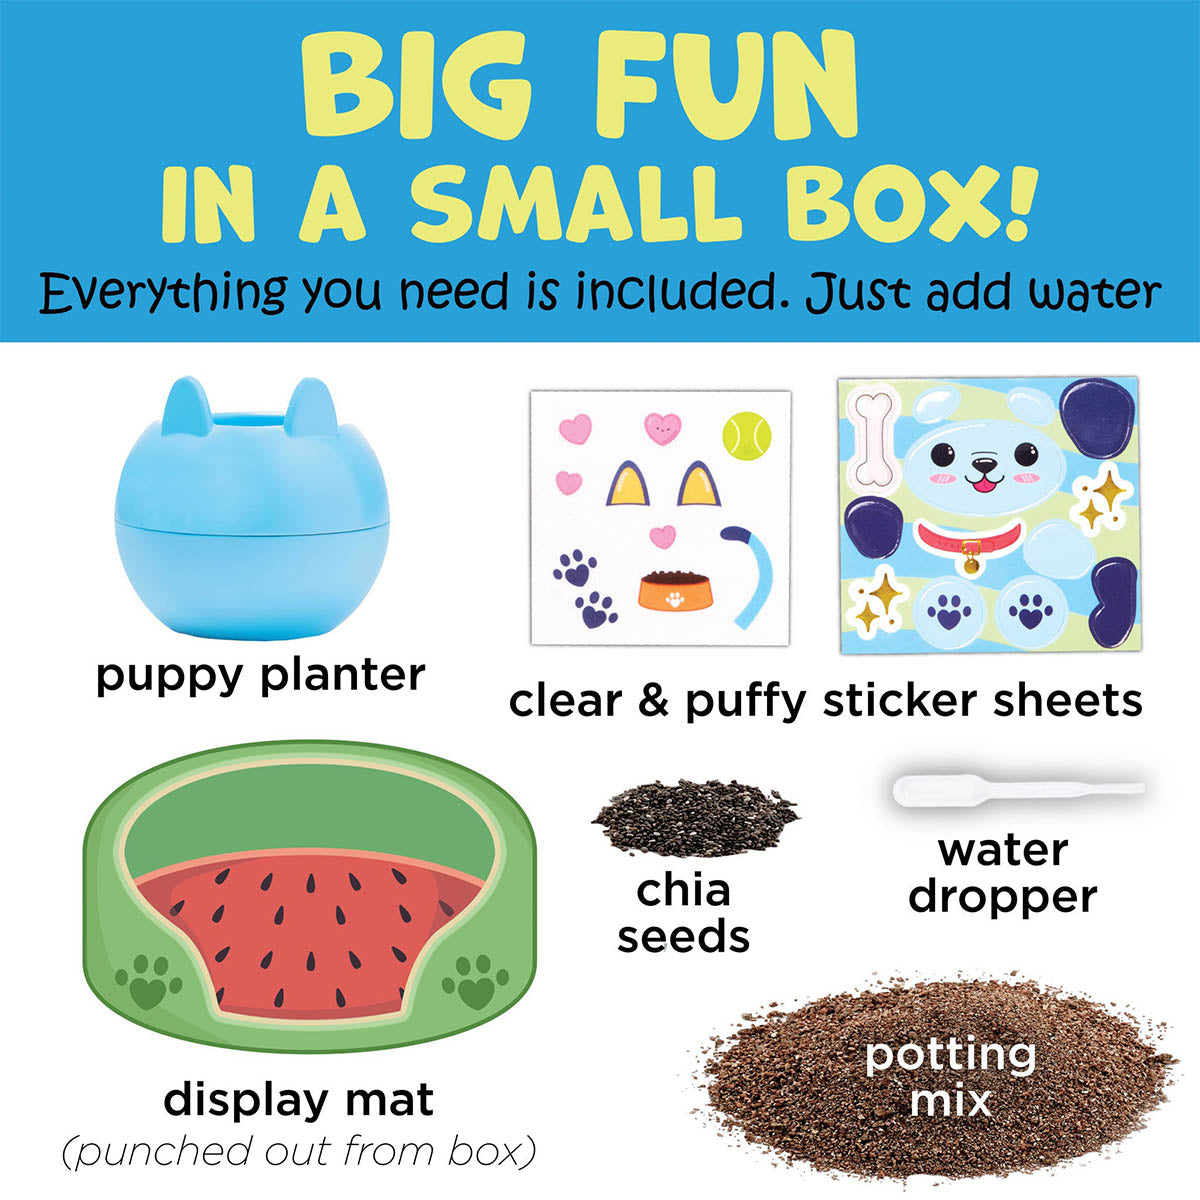 Kit includes everything you need for Plant-a-Pet Puppy chia garden by Creativity for Kids.